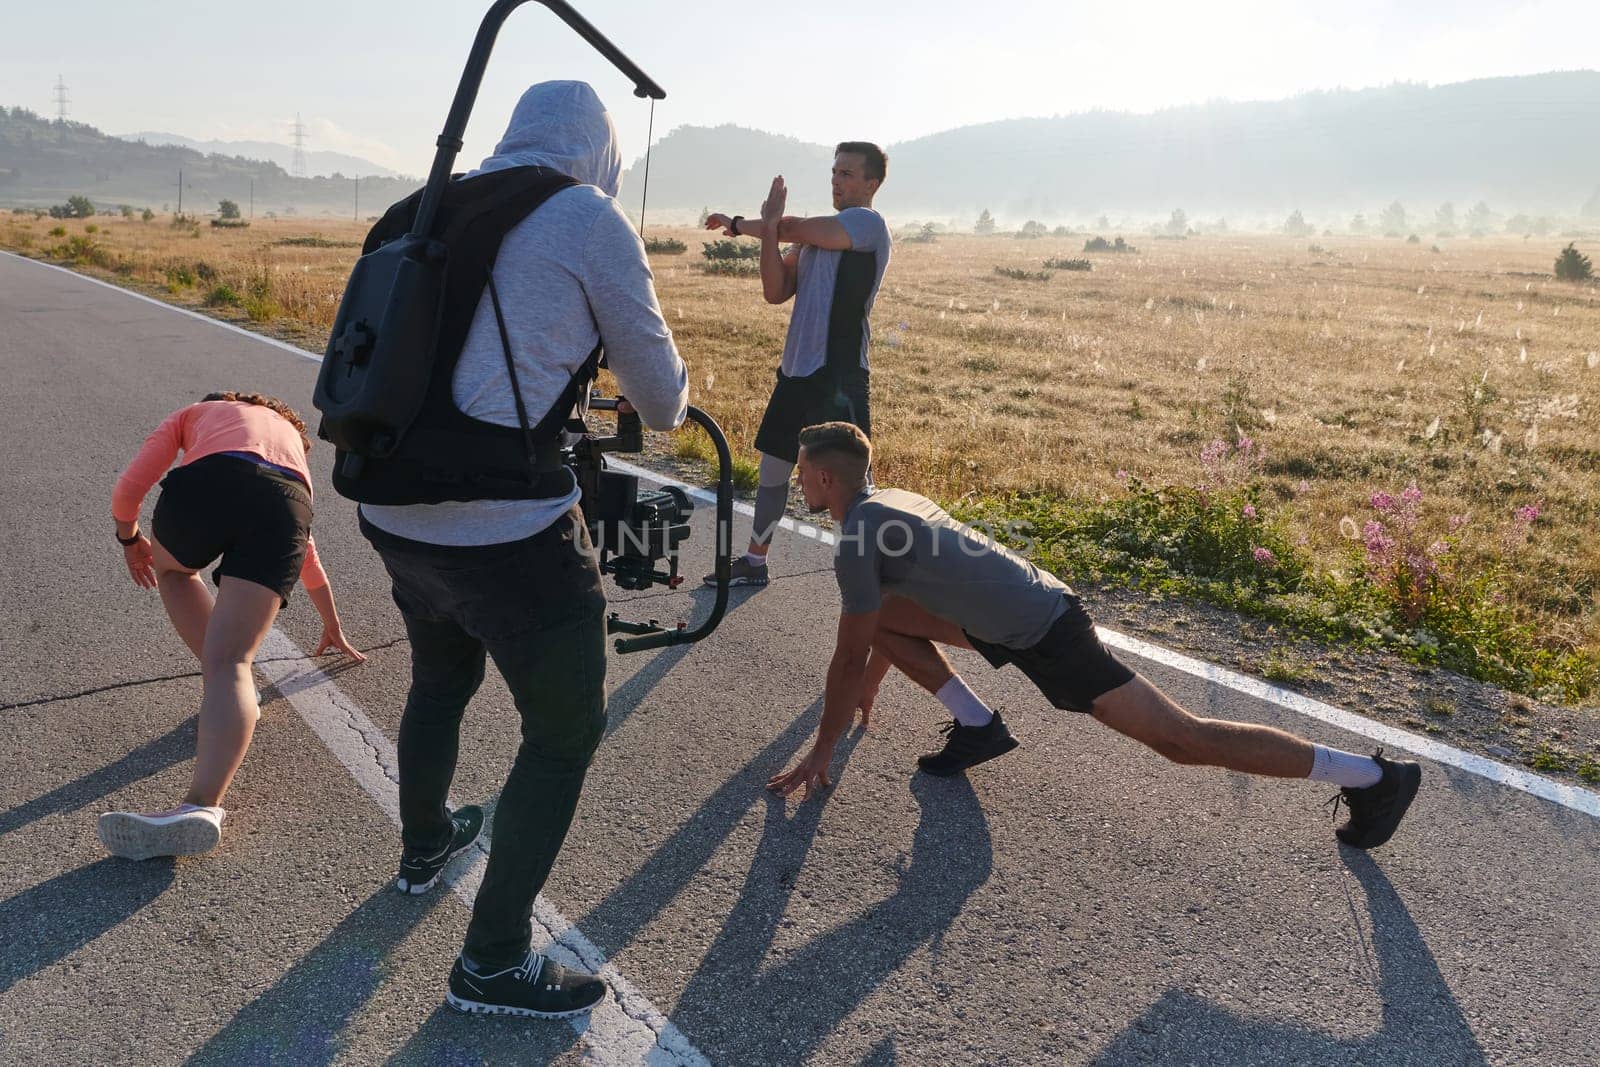 A skilled videographer captures the dynamic scene as athletes engage in warming up and stretching exercises in preparation for their morning run, showcasing dedication and teamwork behind the lens.